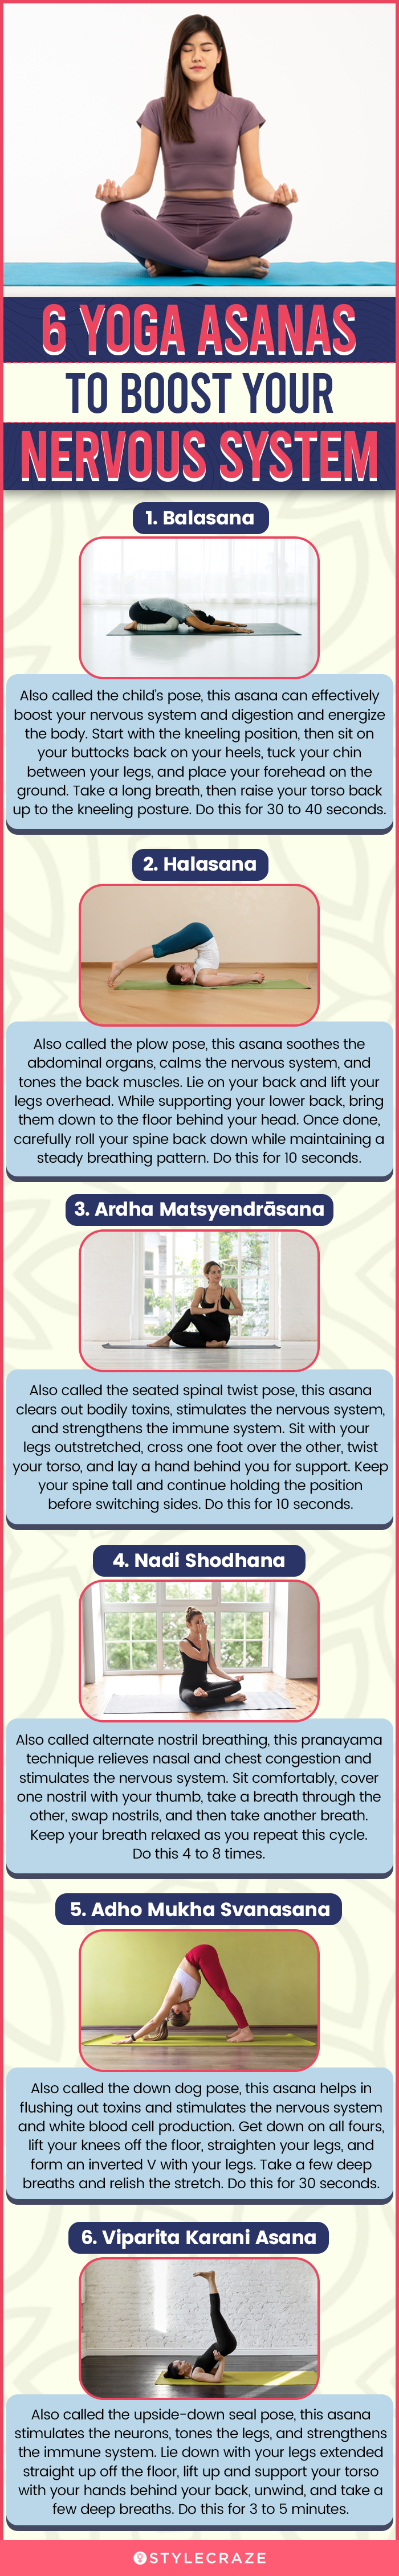 6 yoga asanas to boost your nervous system (infographic)